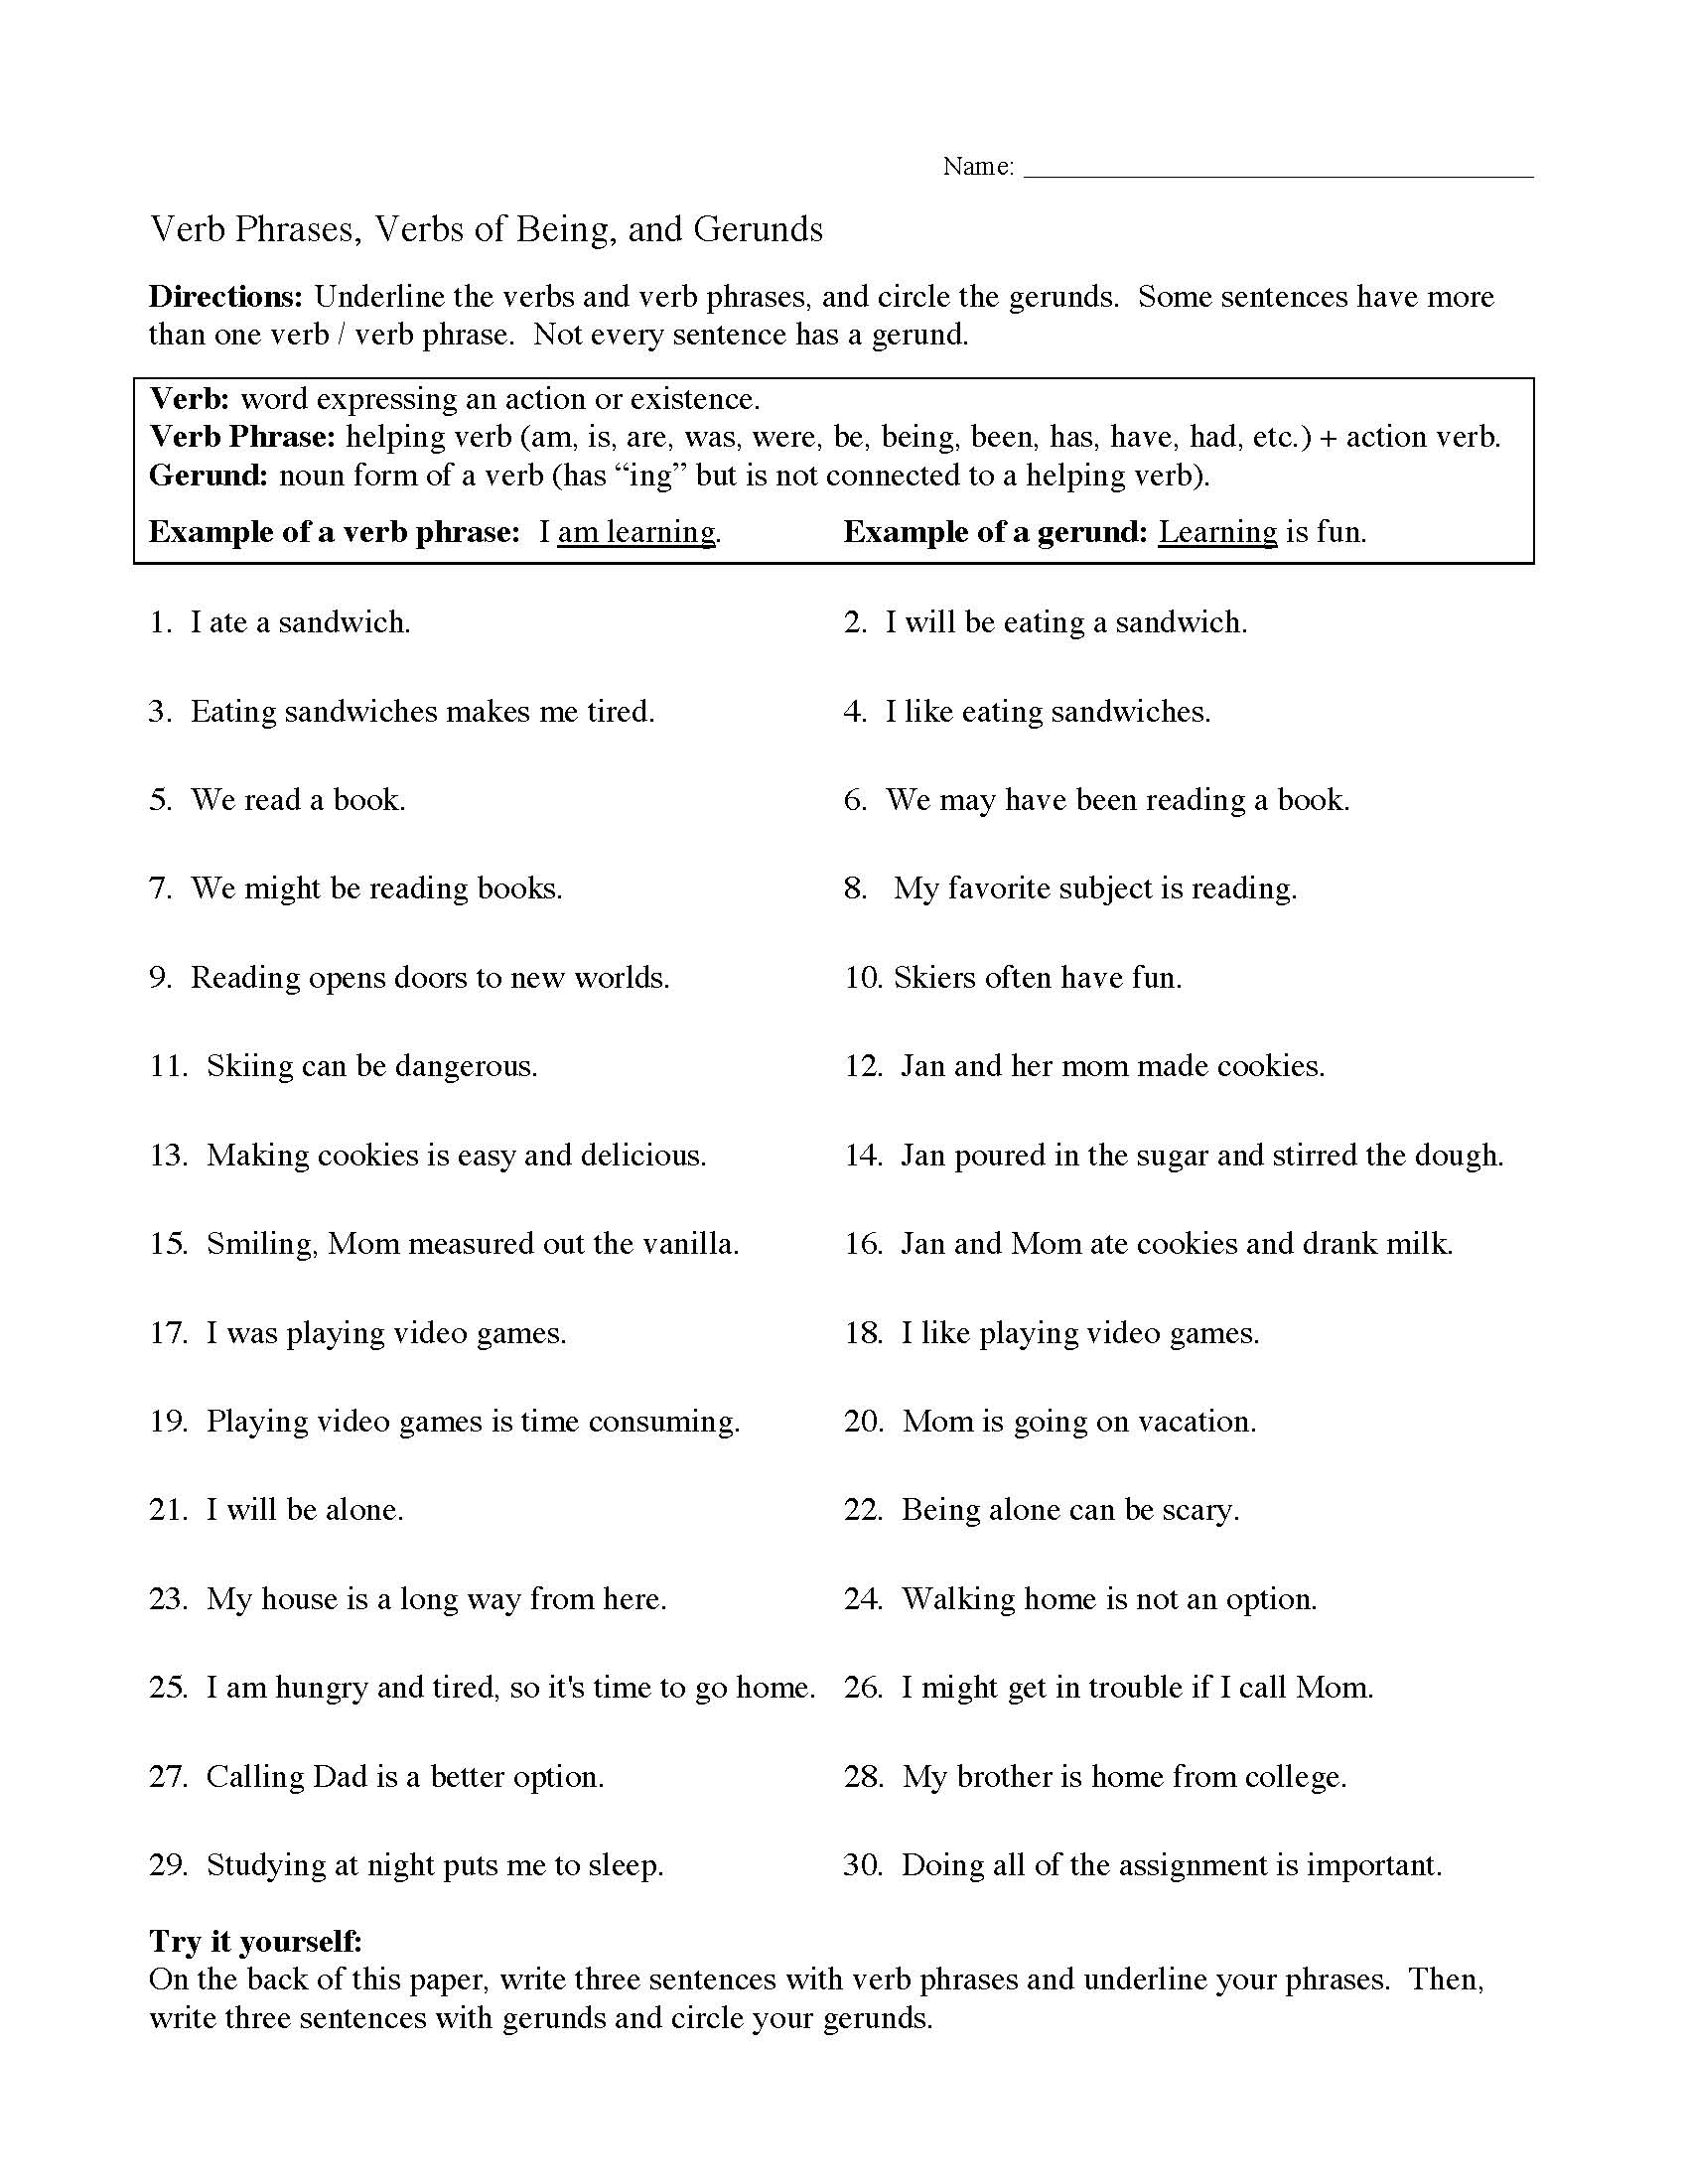 Verbs Verbs Of Being And Gerunds Worksheet Preview